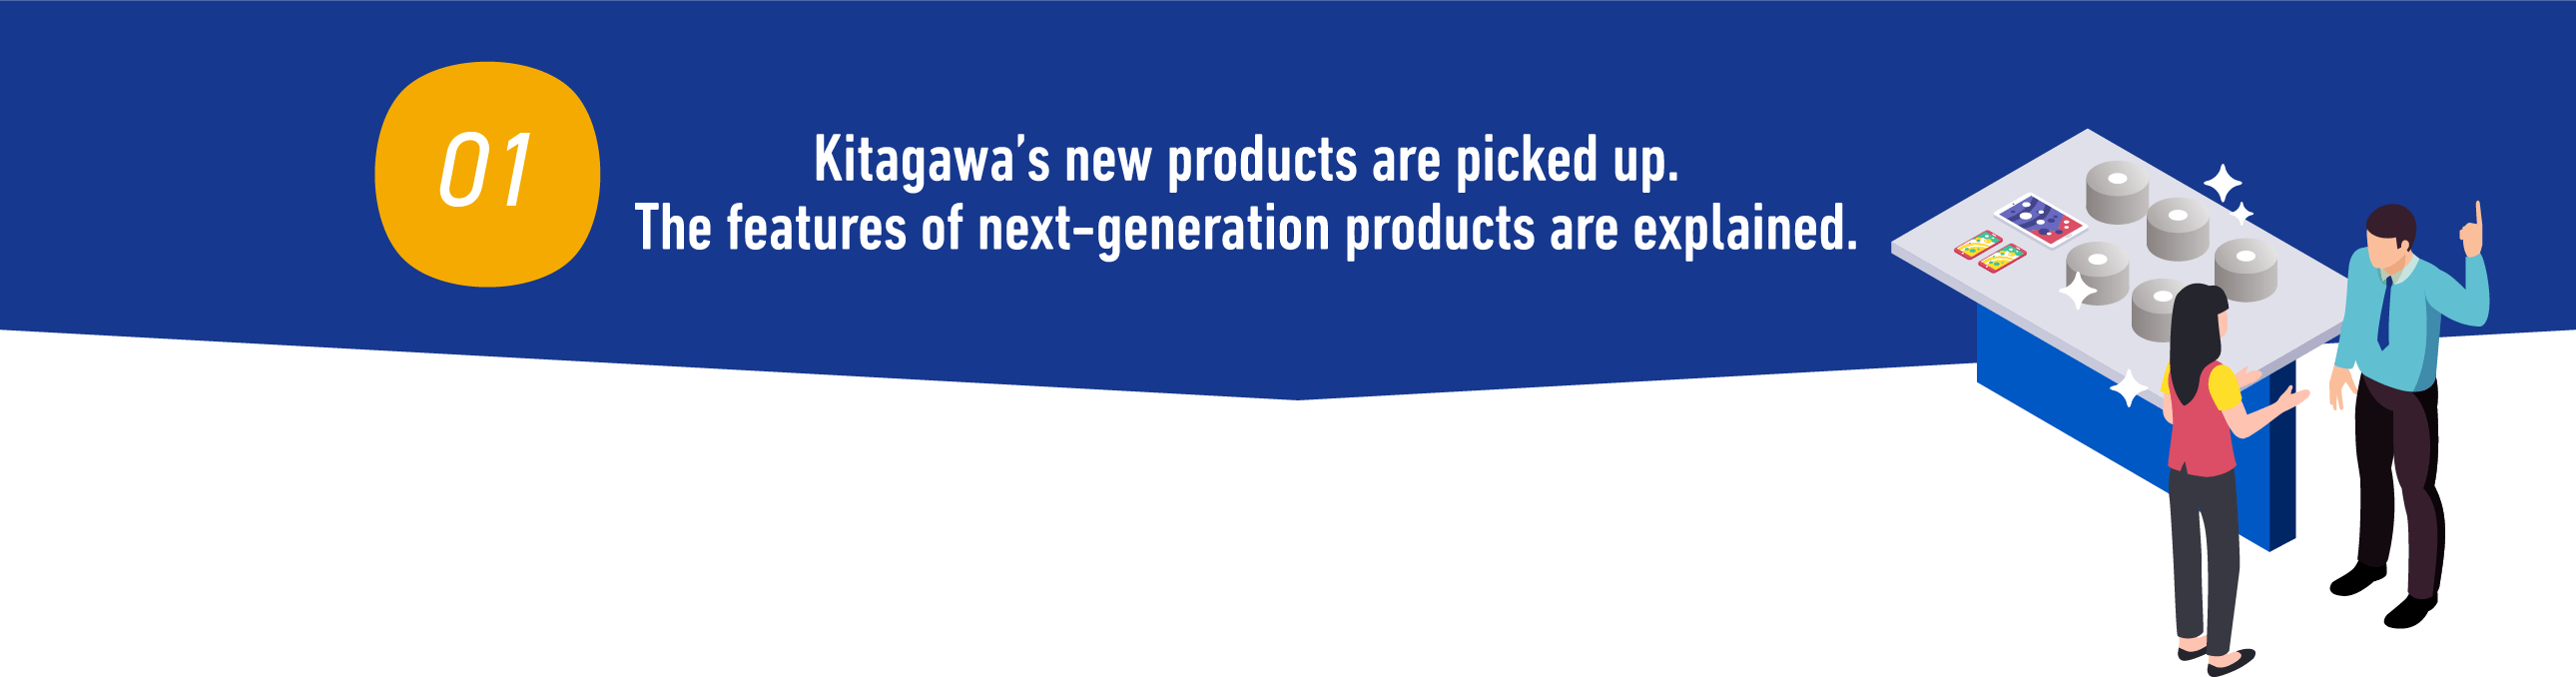 Kitagawa’s new products are picked up. The features of next-generation products are explained.